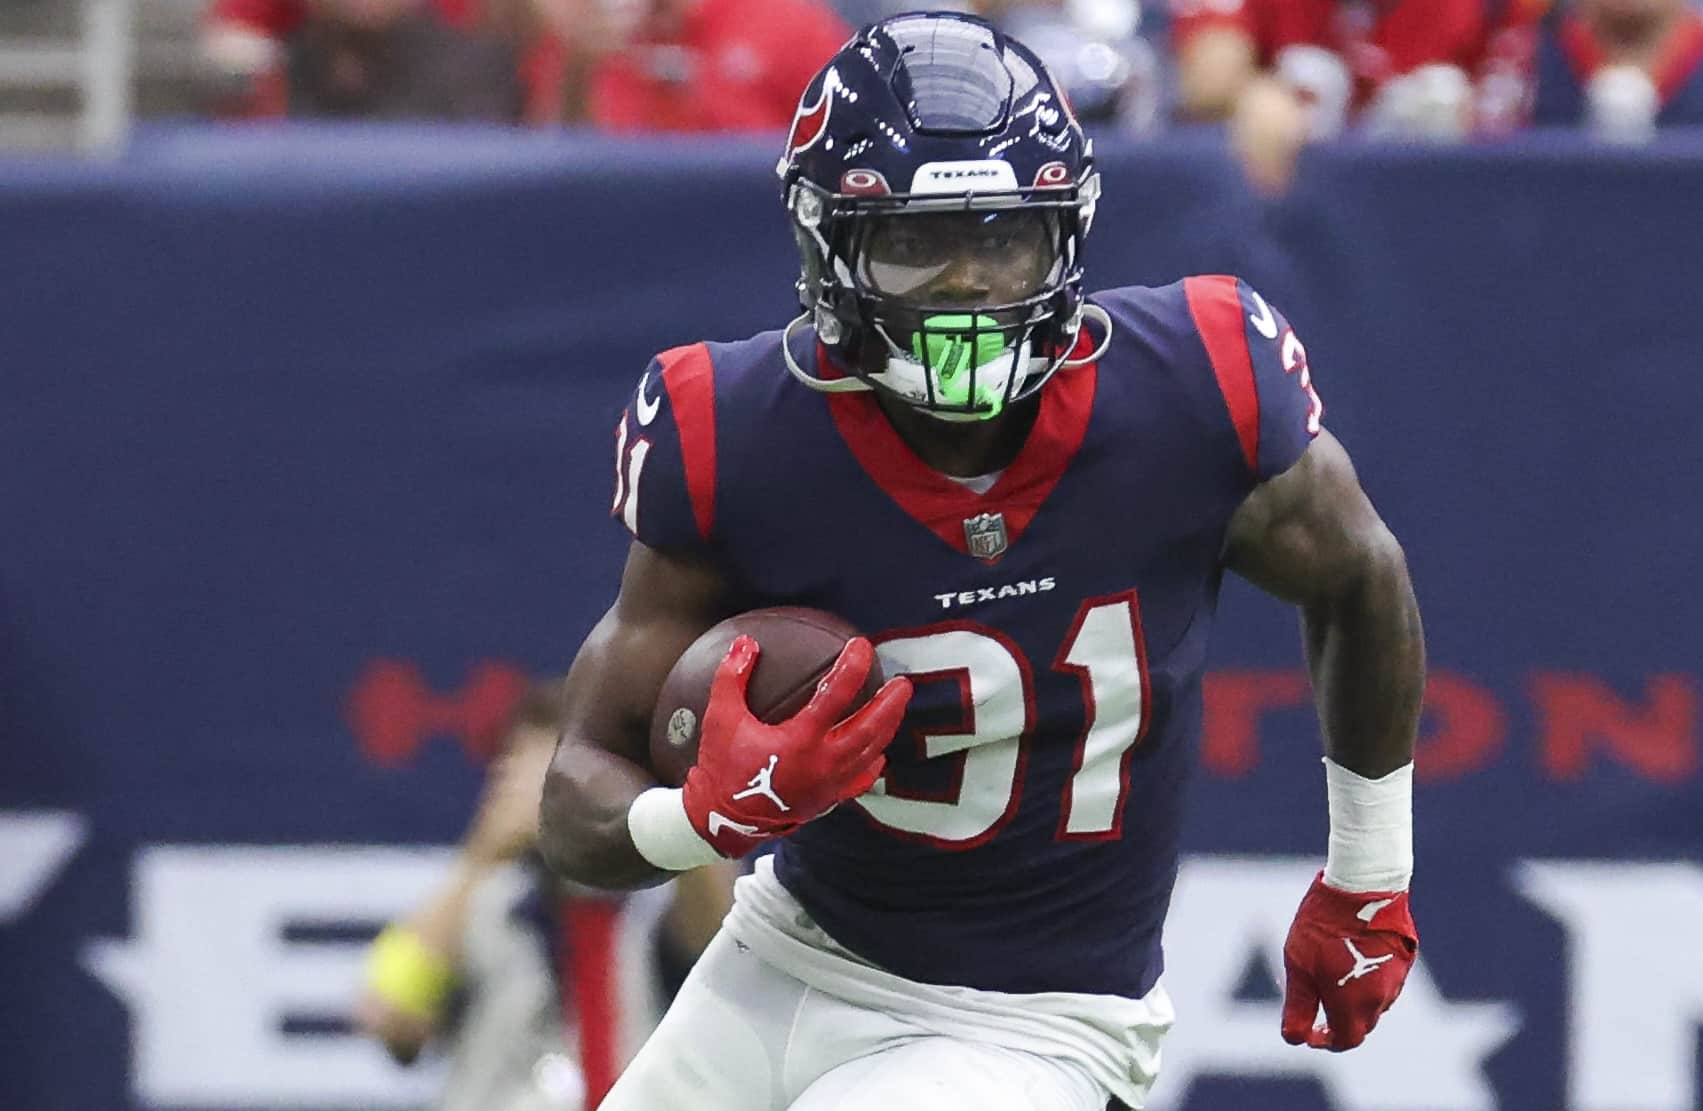 Week 8 RB Fantasy Football Starts and Sits: Time for a Dameon Pierce bounce-back